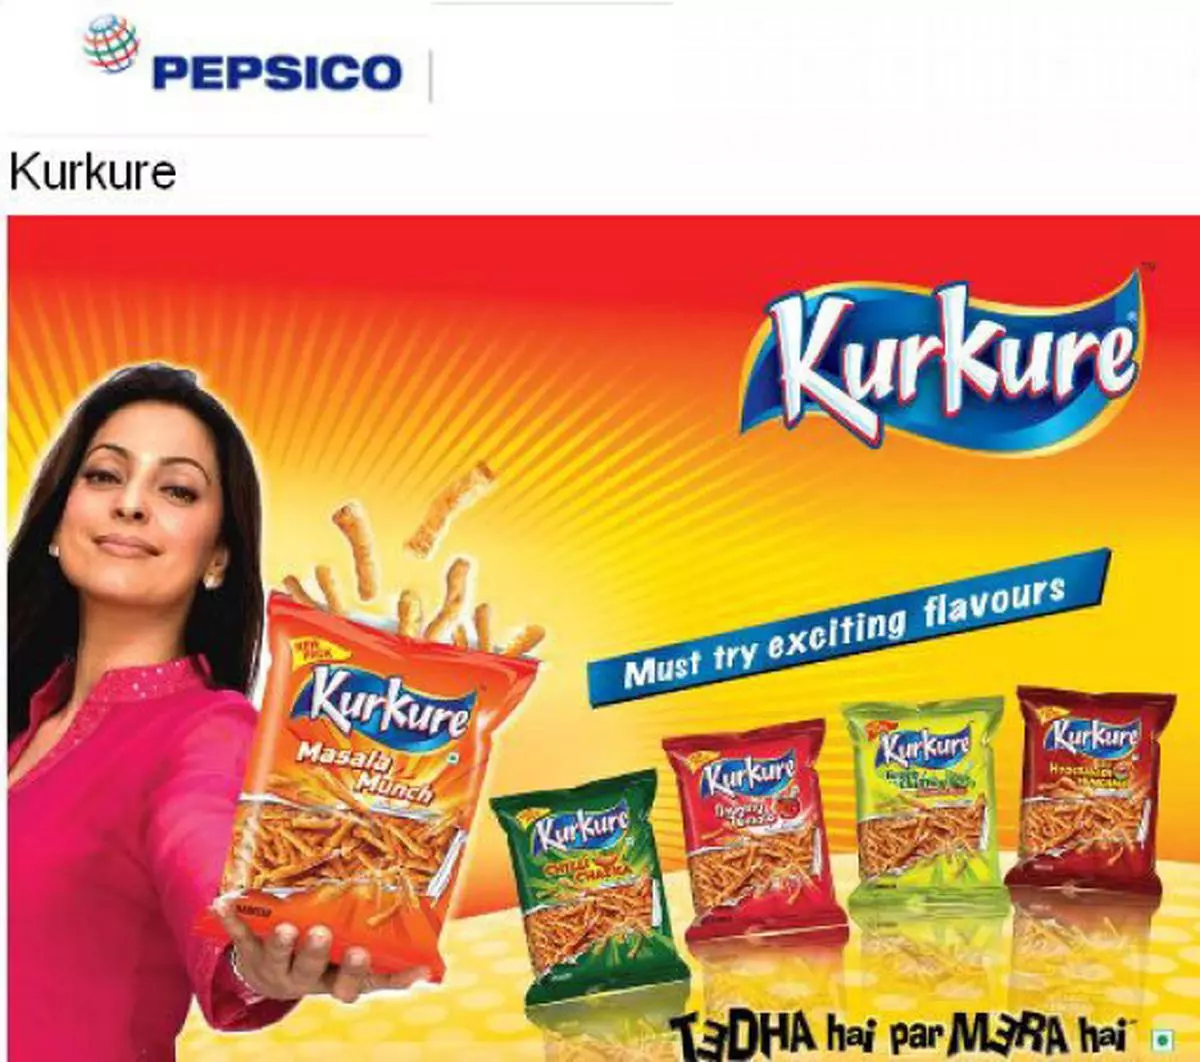 Pepsico signed five brand ambassadors to feature in a series of advertising campaign.